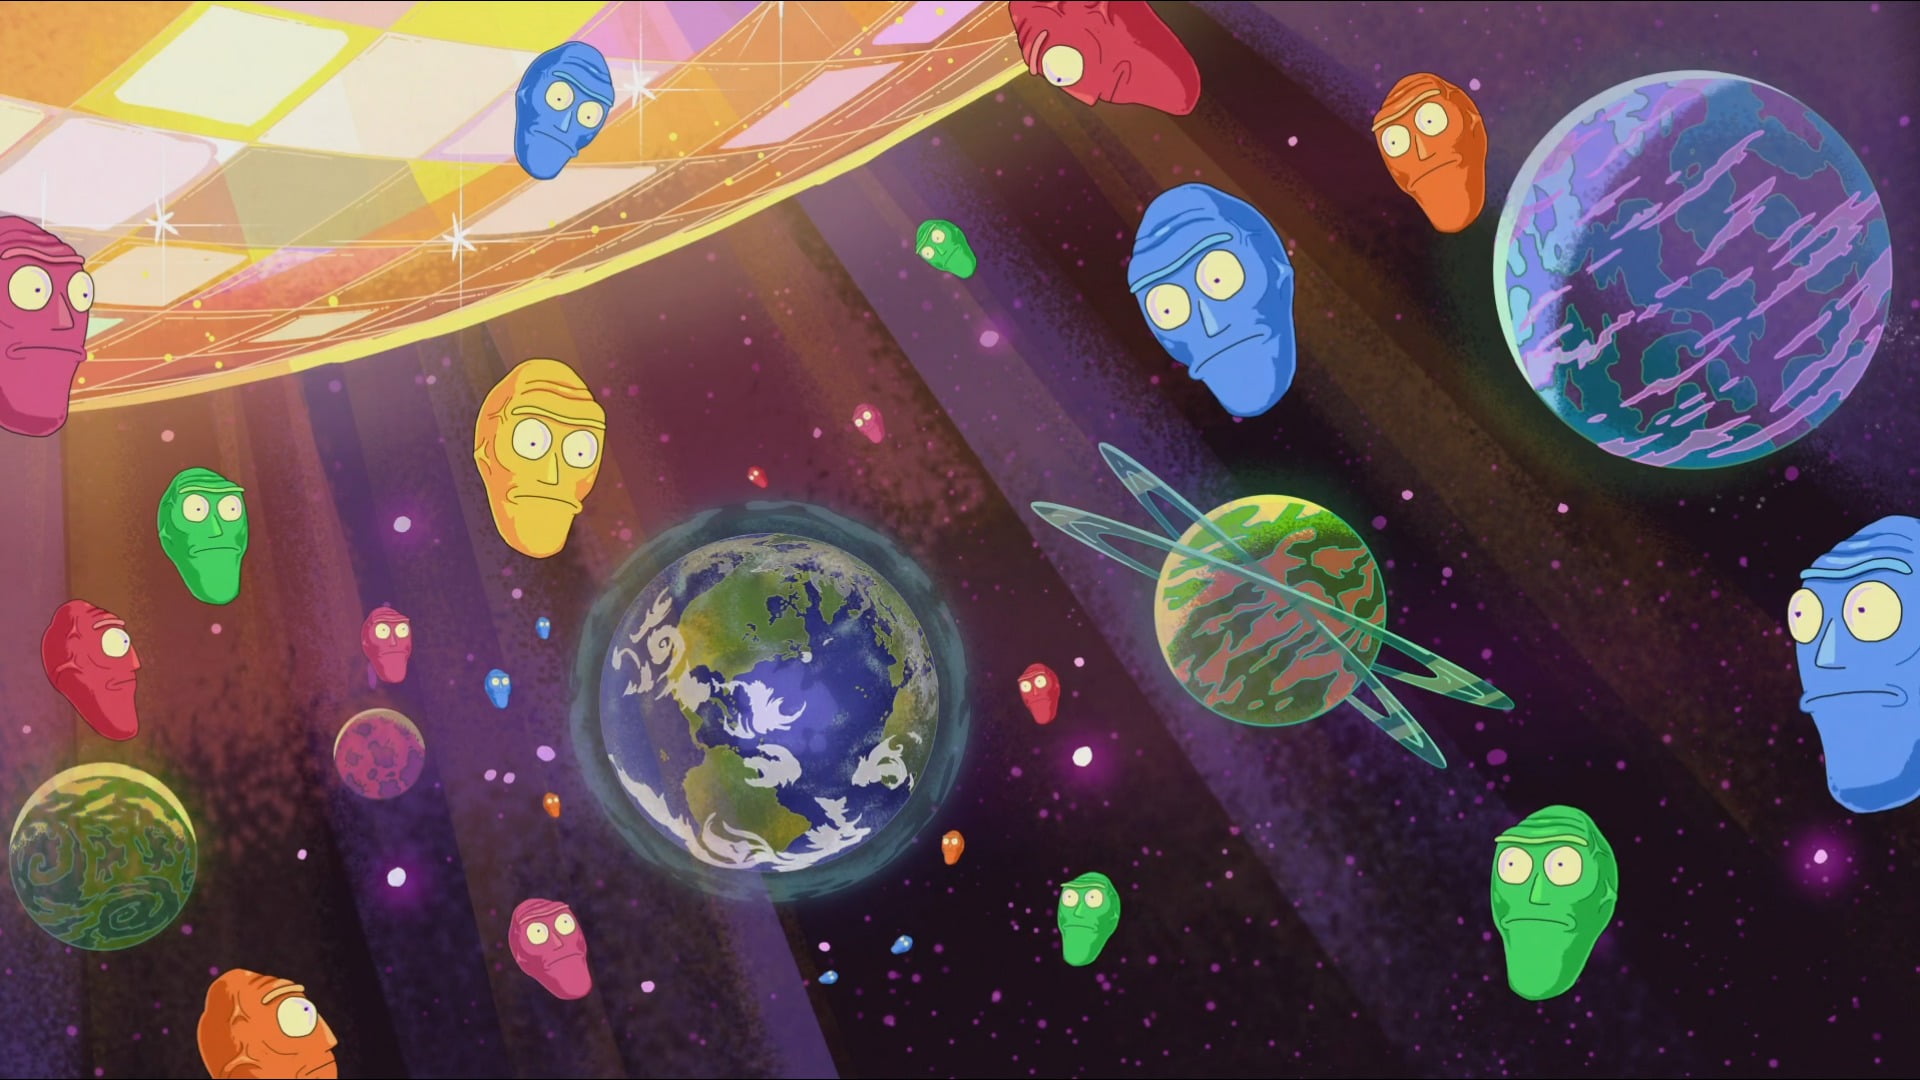 assorted planets illustration, Rick and Morty, space, multi colored